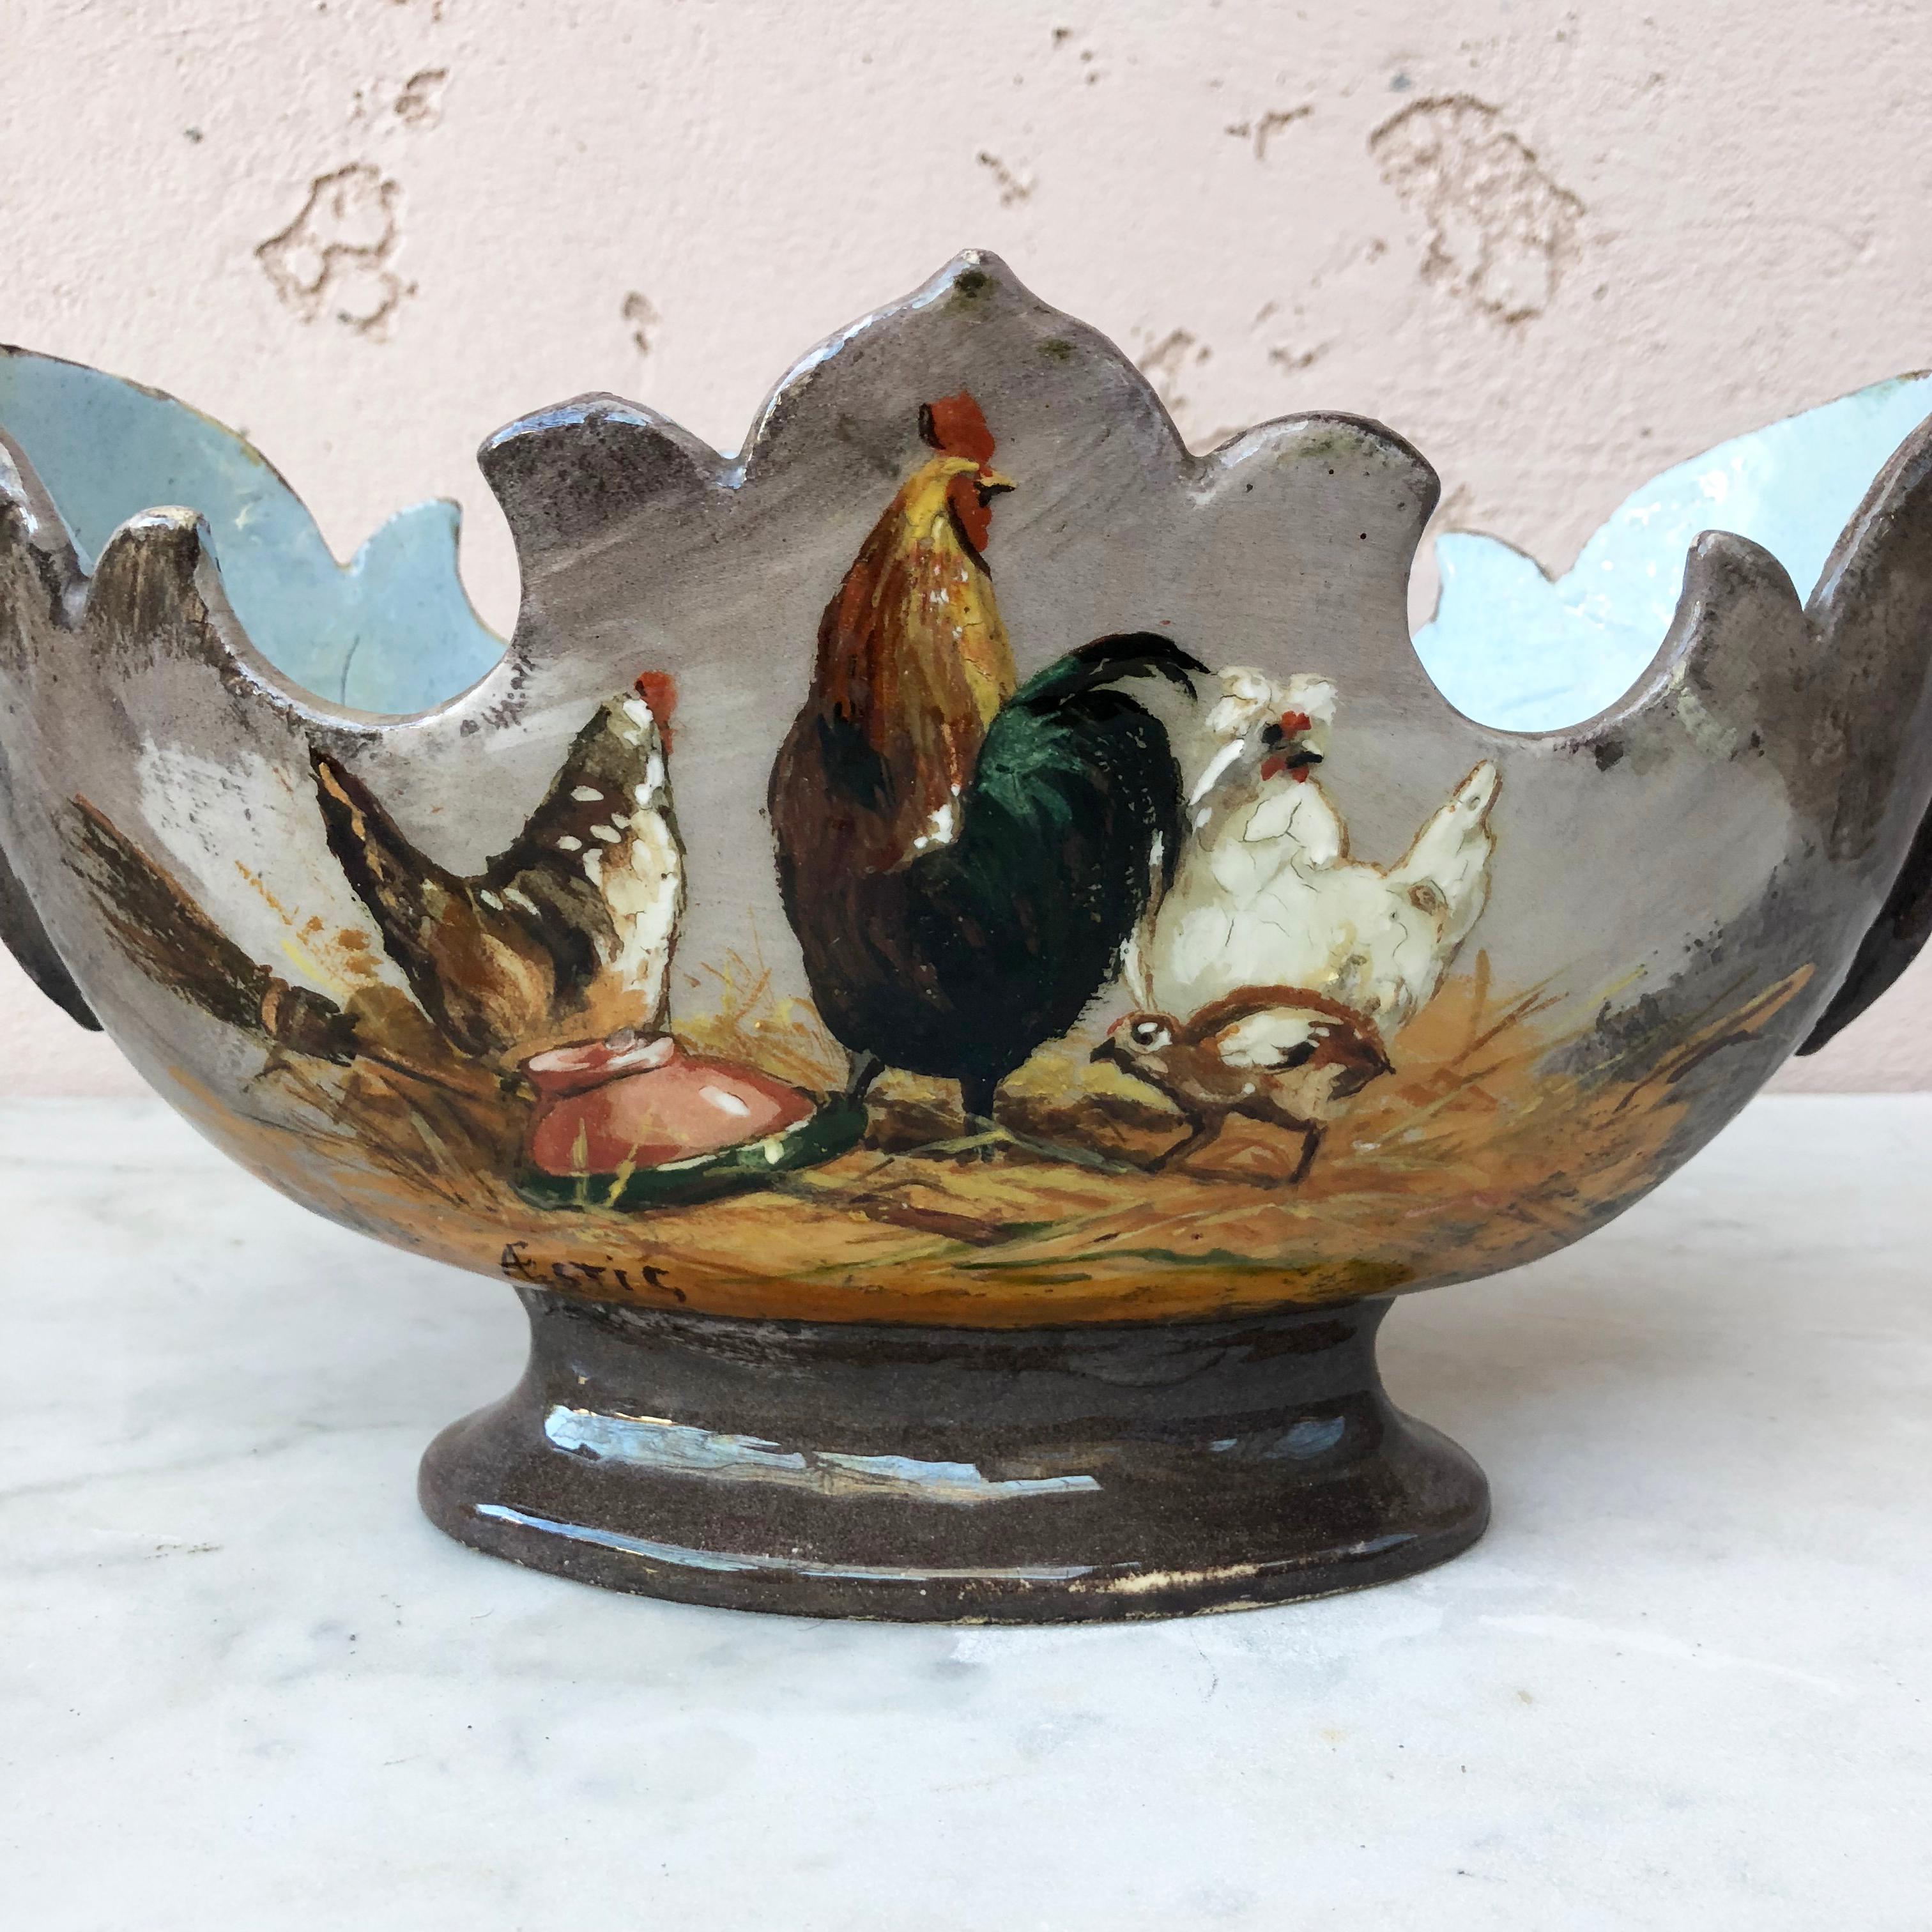 A 19th century Majolica jardinière , in Country style painted with rooster ,hens and chick on straw , the back side is decorated with straw and bucket signed Aistis.
Impressionist style.
Attributed to Montigny sur Loing.